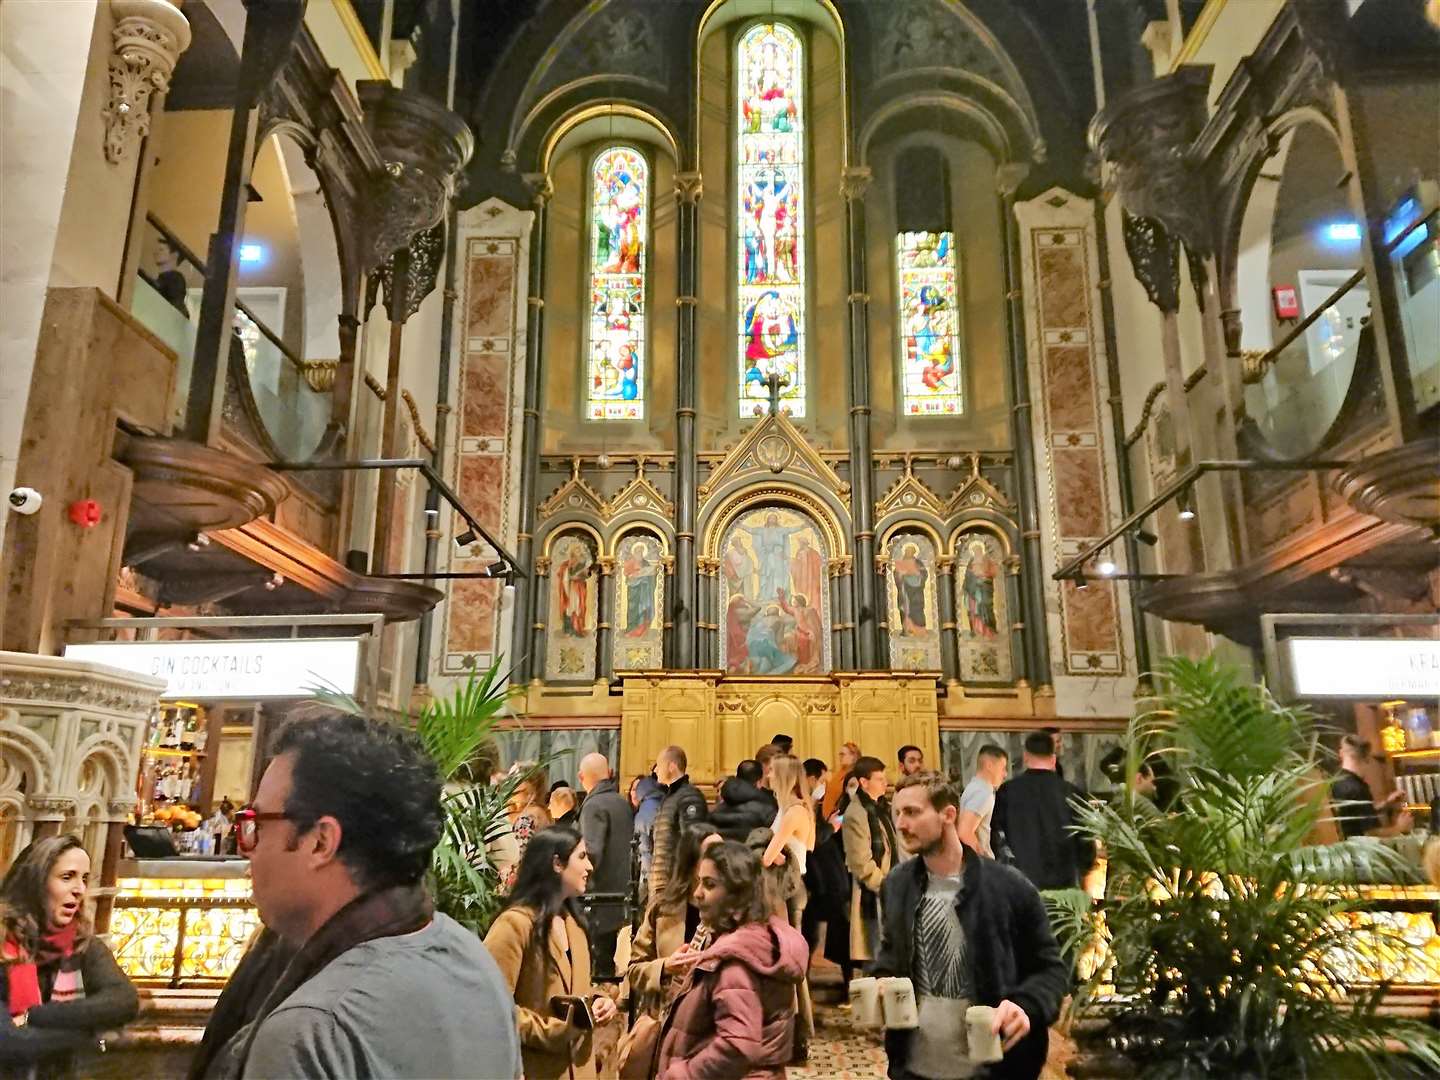 It was busy inside the former church which has been turned into Mercato Mayfair